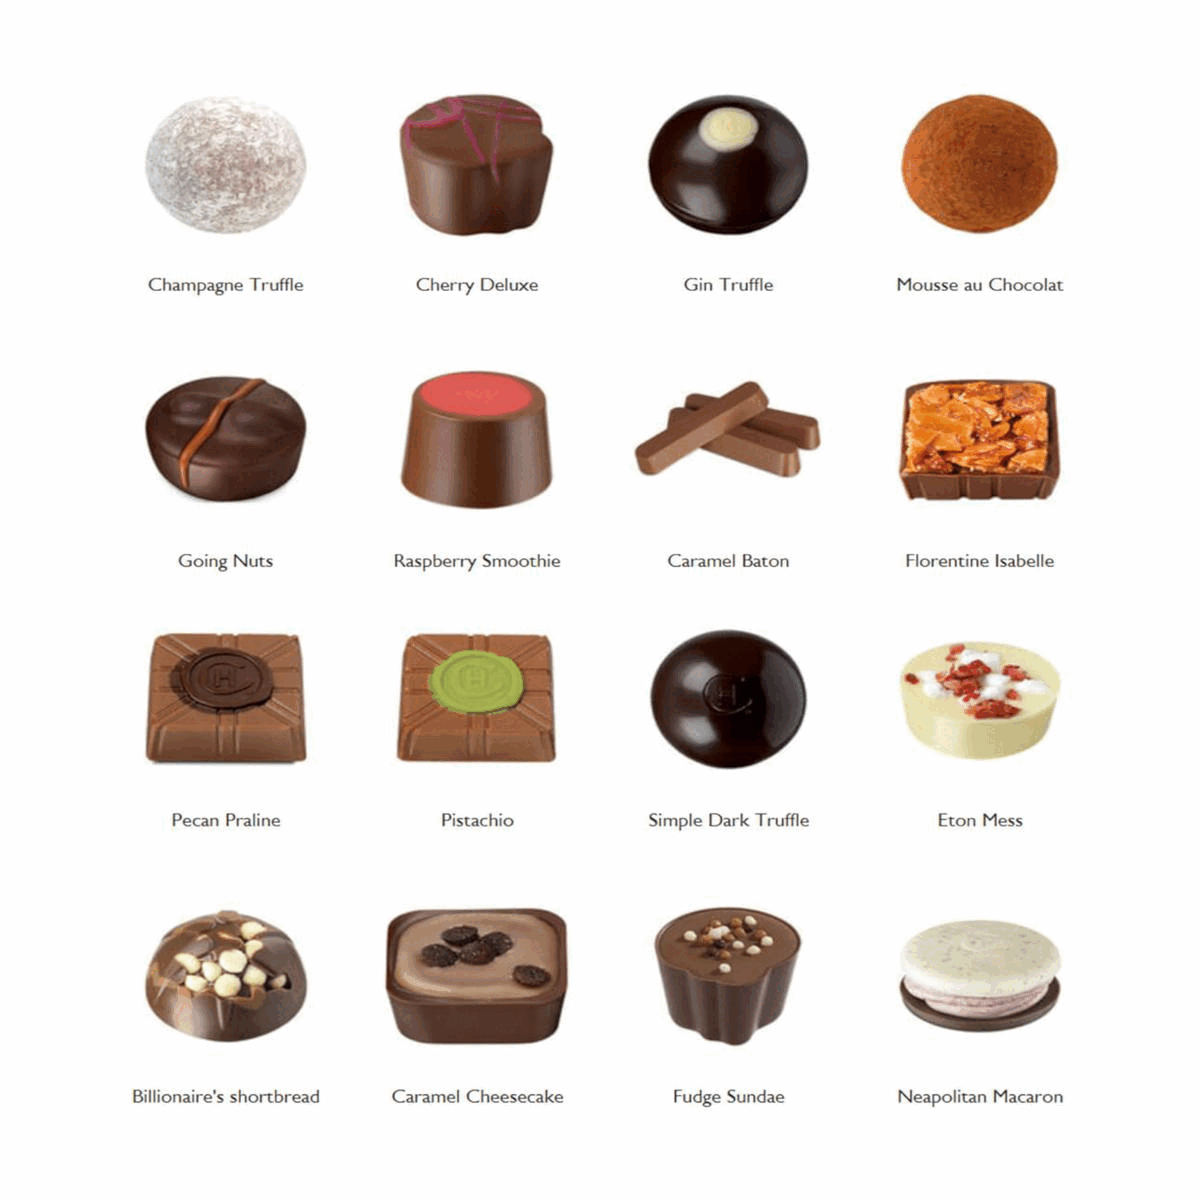 Champagne Truffle, Cherry Deluxe, Gin Truffle, Mousse au Chocolat, Going Nuts, Raspberry Smoothie, Caramel Baton, Florentine Isabelle, Pecan Praline, Pistachio, Simple Dark Truffle, Eton Mess, Billionaire's shortbread, Caramel Cheesecake, Fudge Sundae, Neapolitan Macaron, Carrot Cake, Peanut Butter, 40% Milk Chocolate Baton, 70% Dark Chocolate Batons, White Chocolate Baton, Dizzy Praline, NUTRITIONAL INFORMATION, Suitable for vegetarians, YES, Suitable for vegans, NO, Contains Tree Nuts, YES, Contains Gluten/Wheat, YES, Contains Peanuts, YES, Contains Egg,YES, Contains Milk, YES, Contains Soya, YES, Contains Sulphites, YES, Contains Sesame, NO, Free from alcohol, NO, Free from artificial flavors, YES, Free from artificial colors, YES,NUTRITIONAL INFORMATION,TYPICAL VALUES, PER 100G, Energy KJ / Energy Kcal 2360 570 Fat (g) 39.9 Of which saturates 
            (g) 22.1 Carbohydrate (g) 41.9 Of which sugars (g) 34.8 Protein (g) 7.5 Fibre (g) 7.8 Salt (g) 0.2